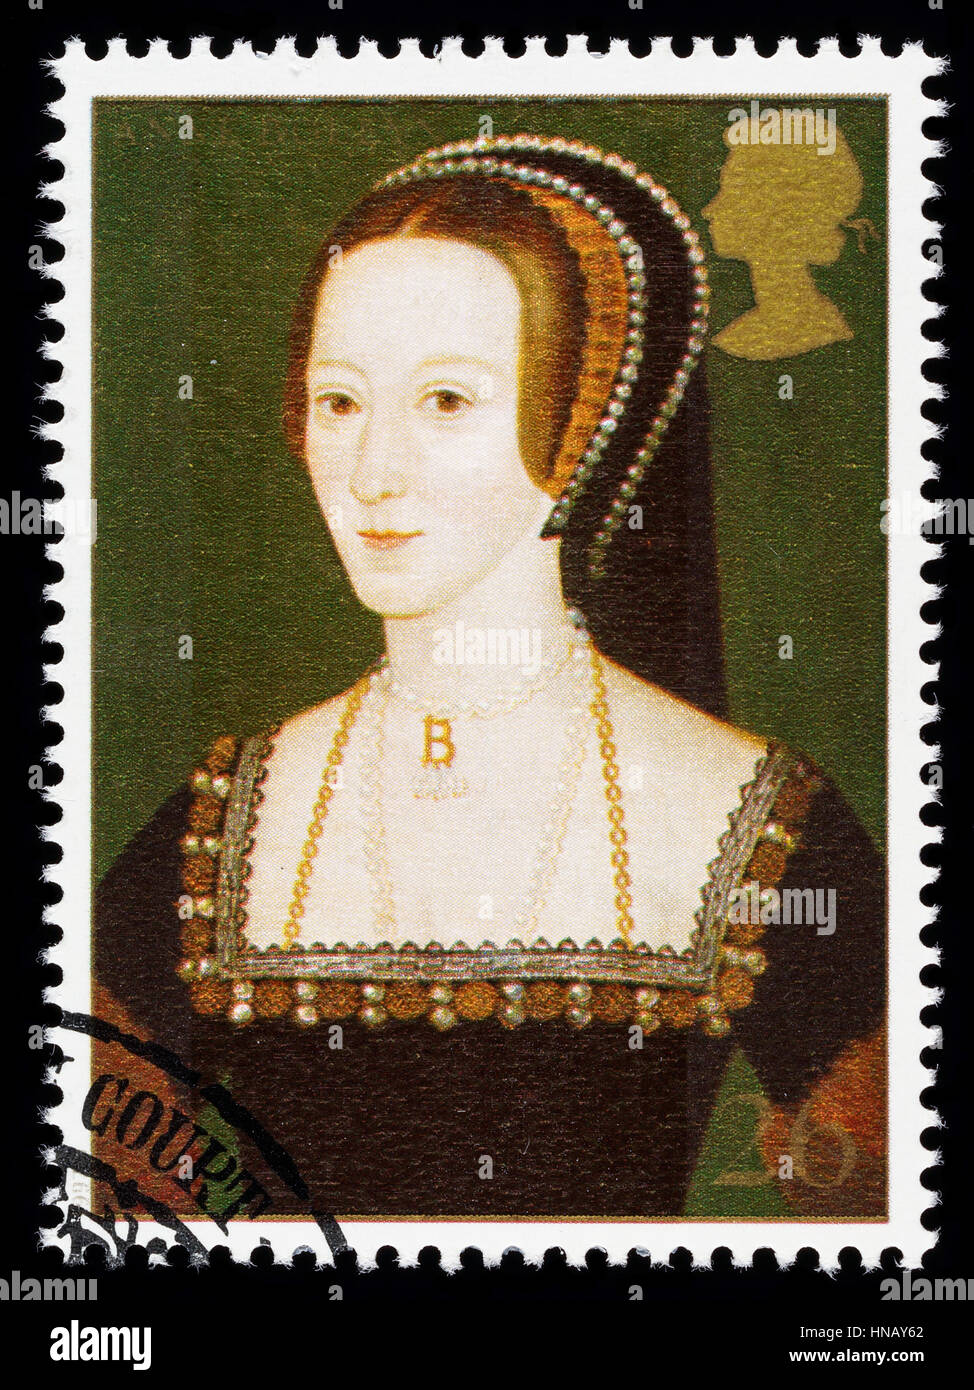 UNITED KINGDOM - CIRCA 1997: used postage stamp printed in Britain commemorating King Henry 8th showing Anne Boleyn one of his many Wives Stock Photo